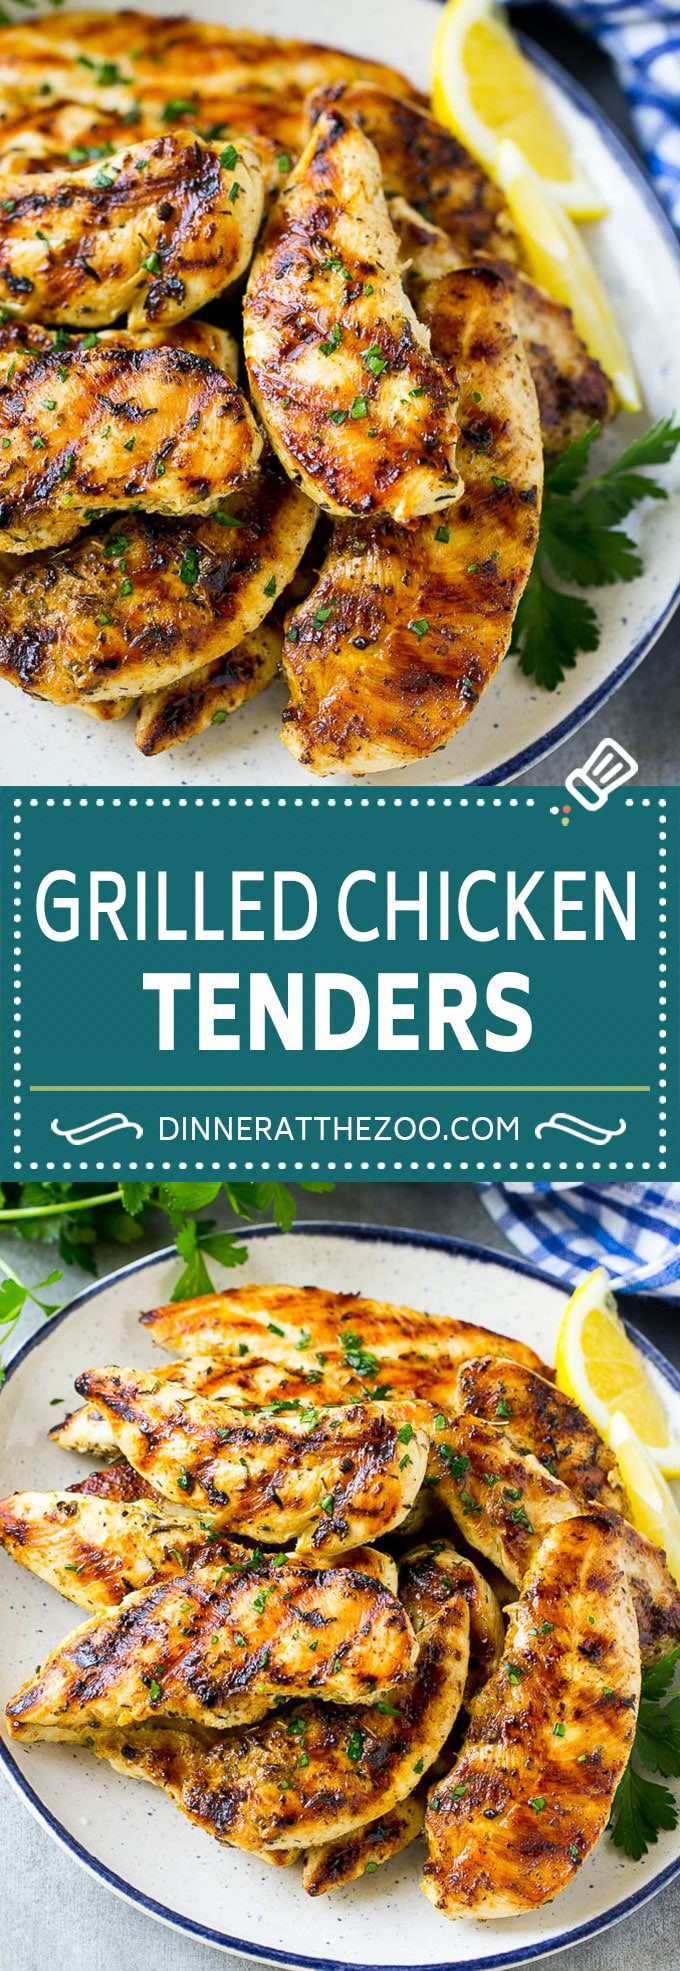 How Long To Grill Chicken Tenders
 Grilled Chicken Tenders Dinner at the Zoo